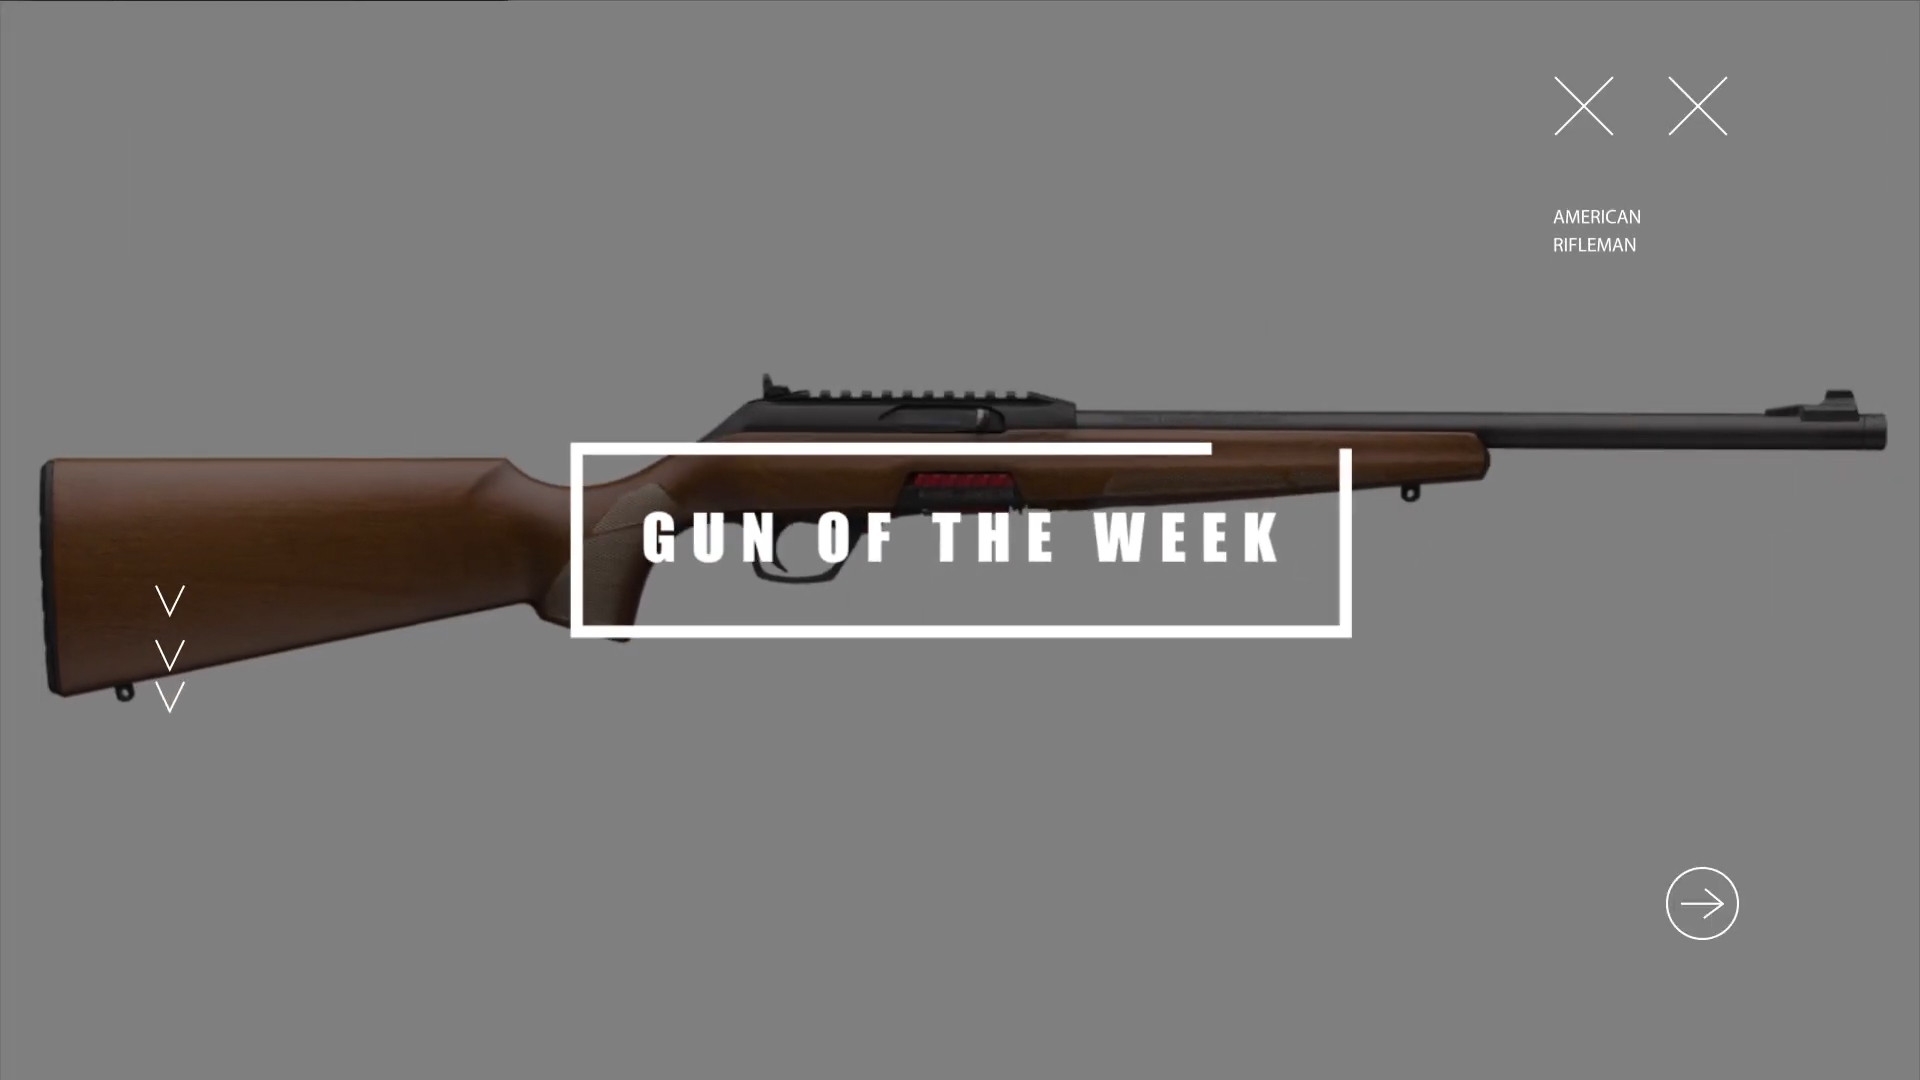 GUN OF THE WEEK AMERICAN RIFLEMAN text overlay rifle right side title screen